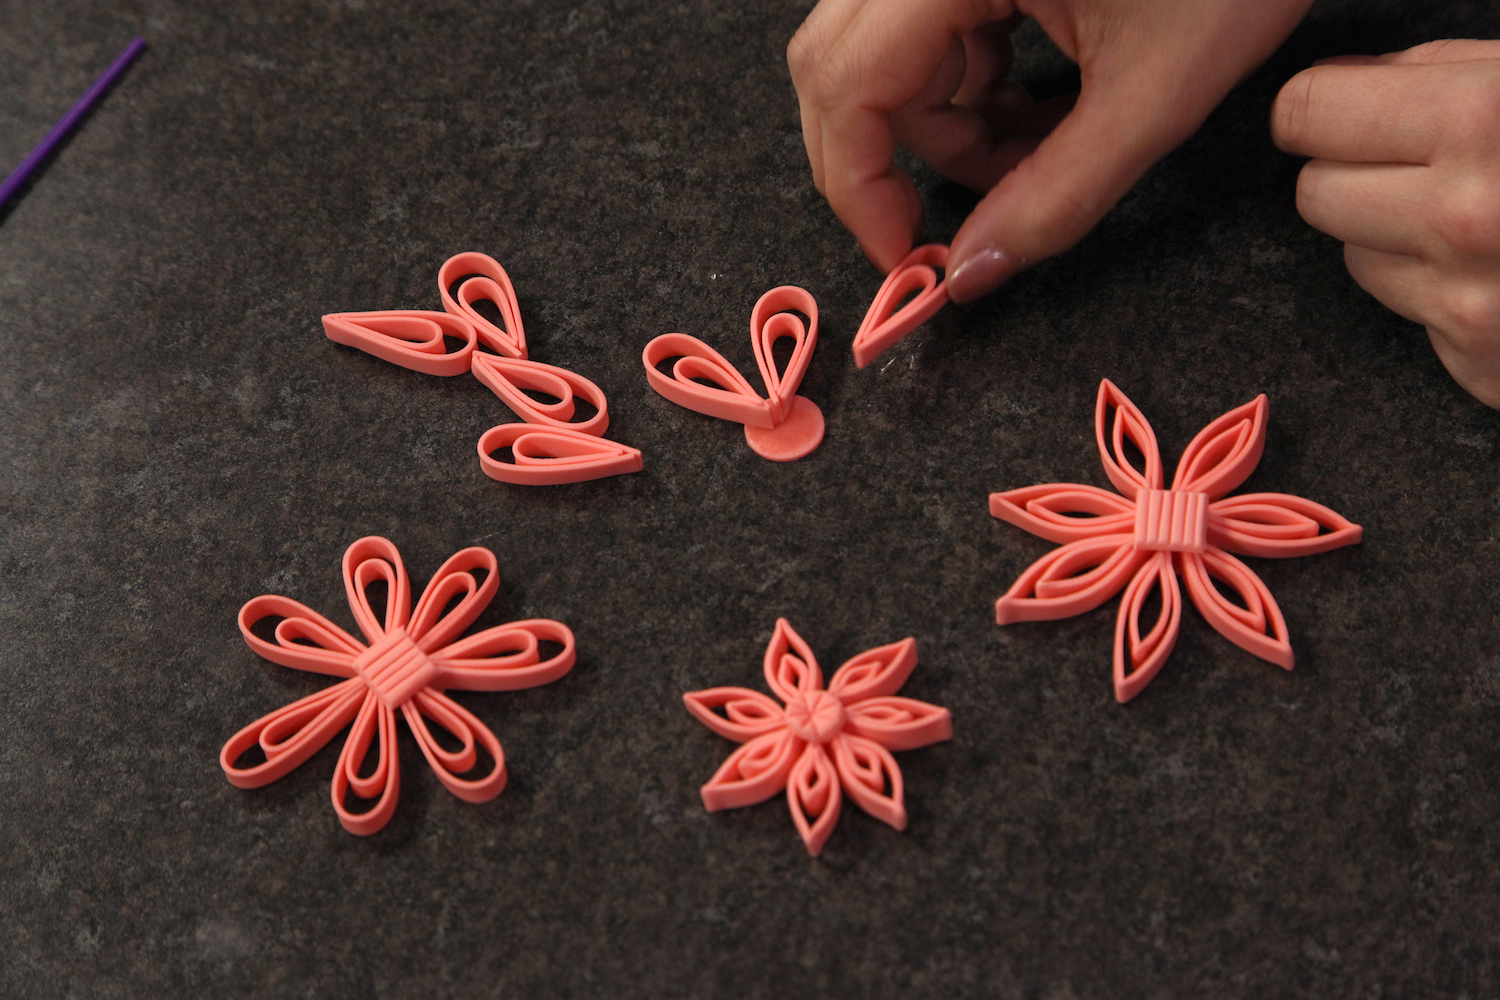 Making Quilled Flowers